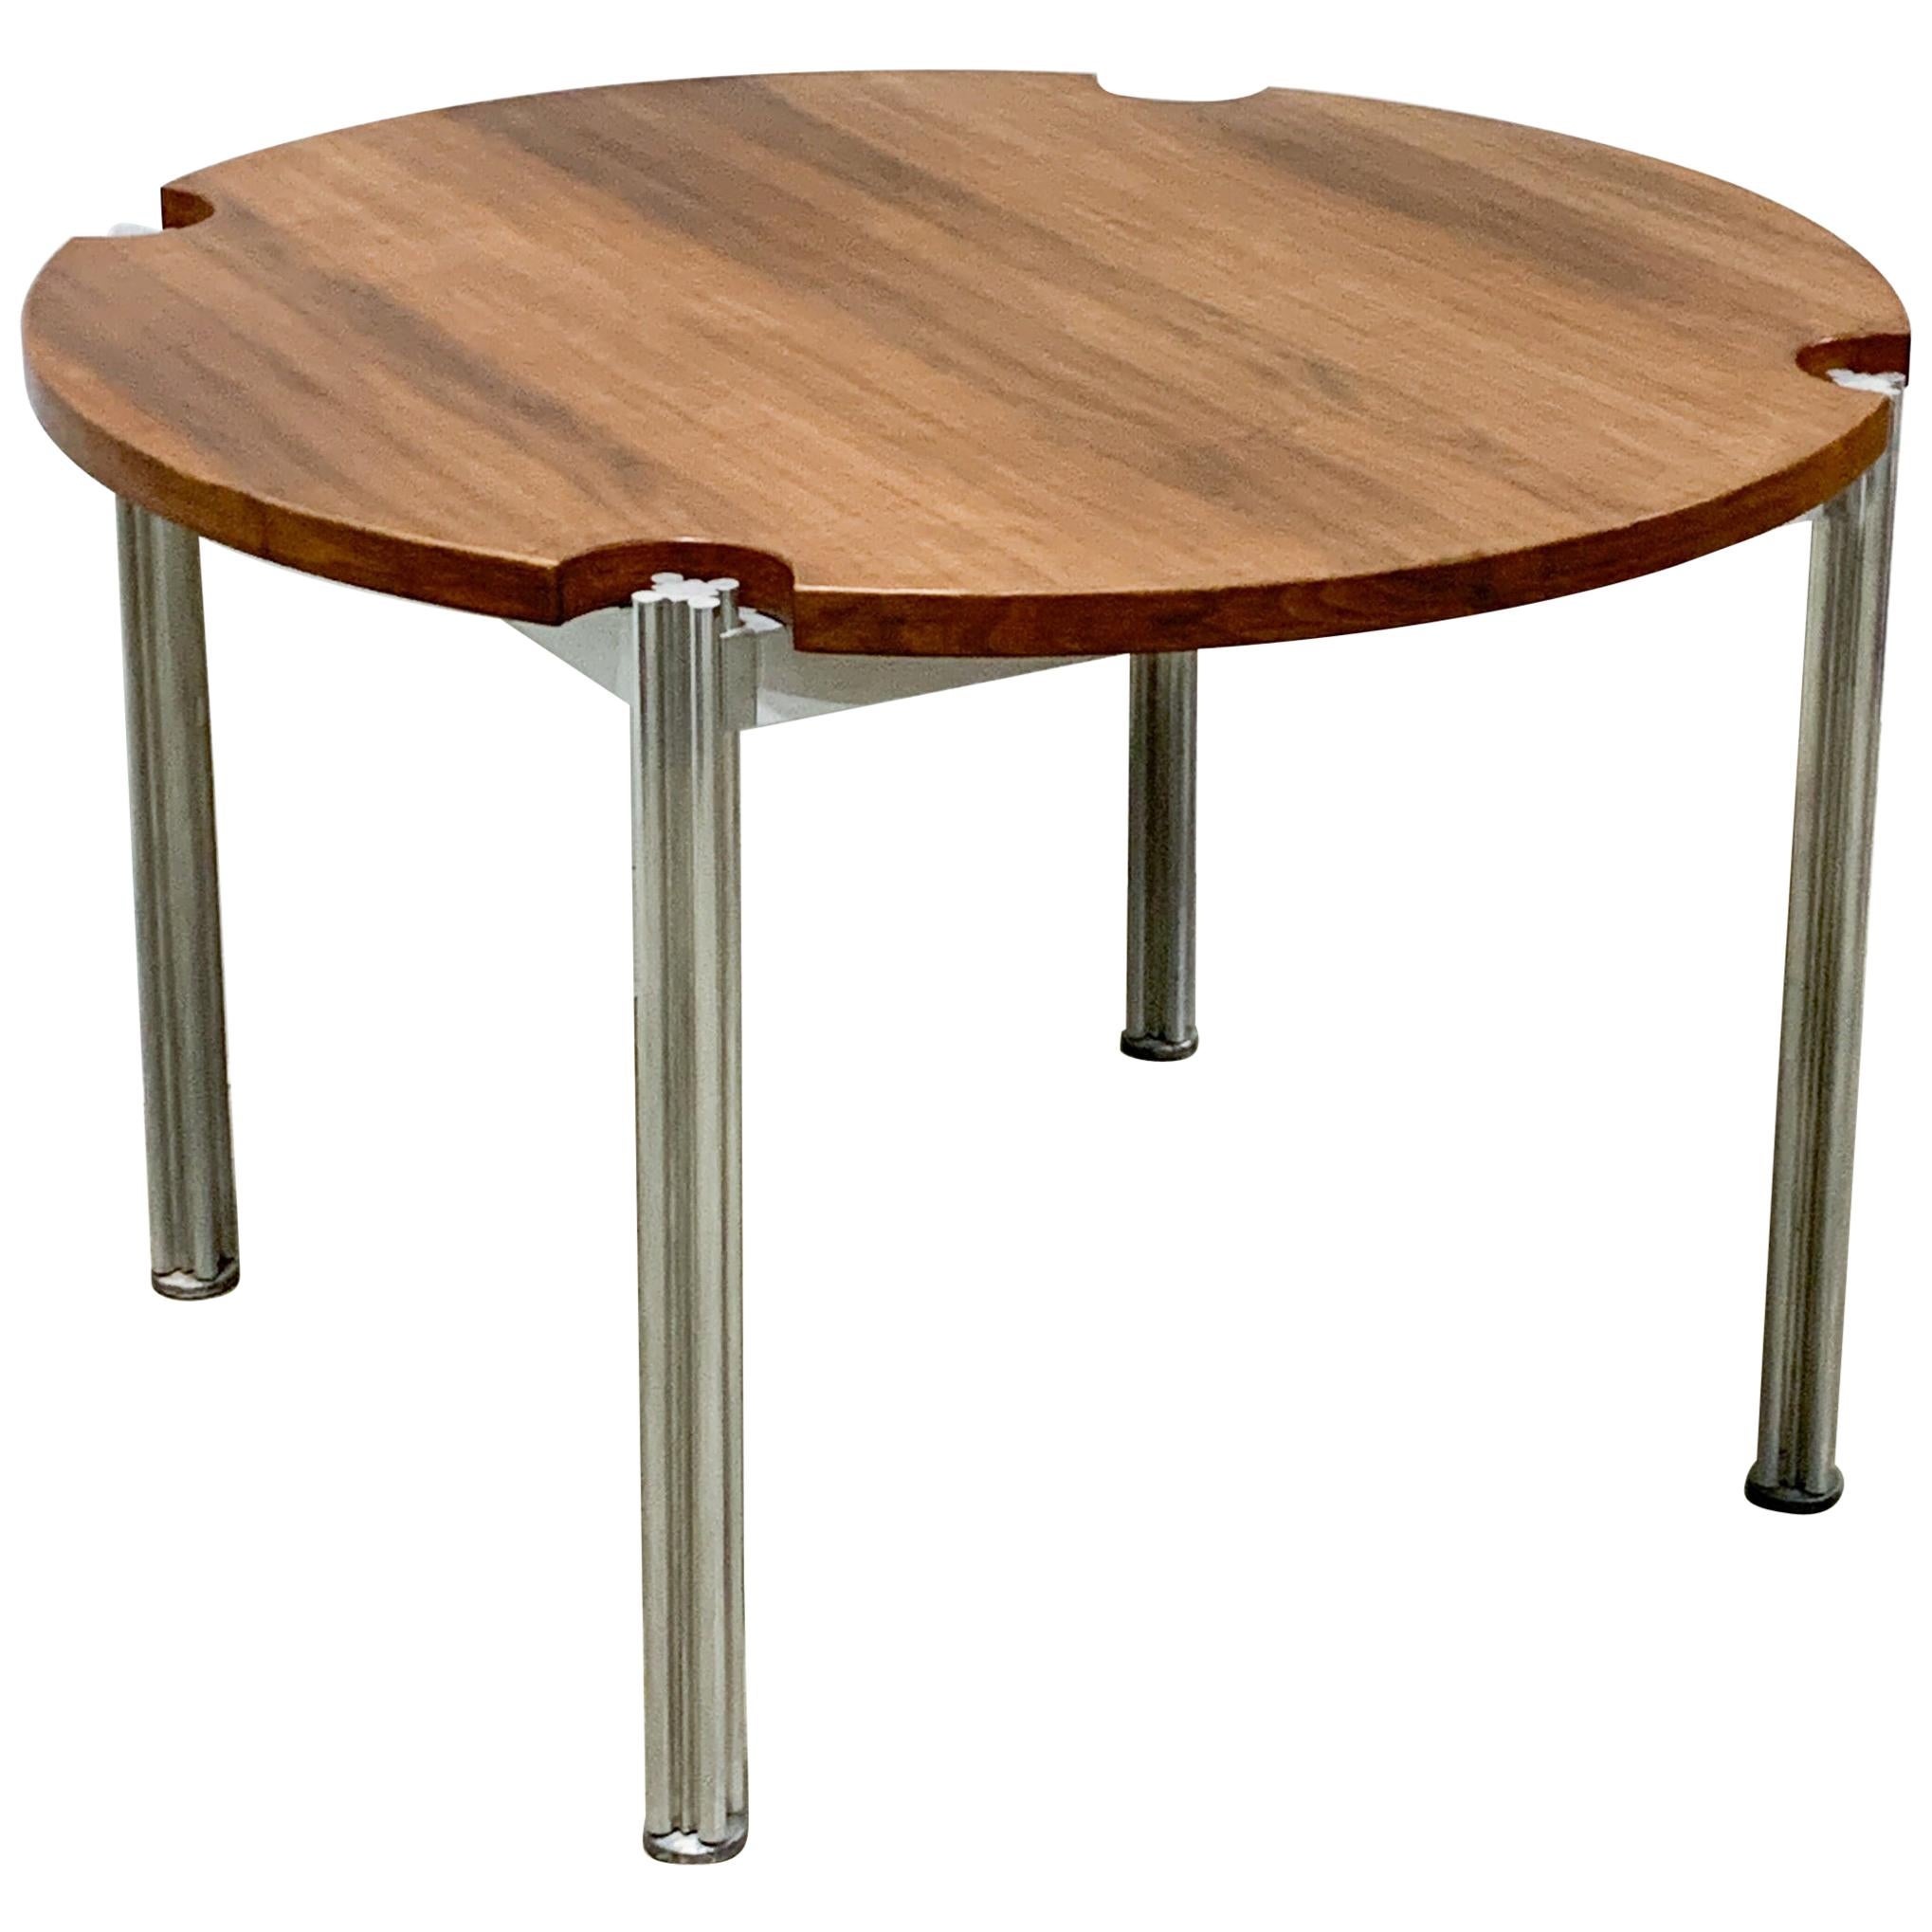 George Ciancimino for Risom Aluminum and Walnut Dining Table